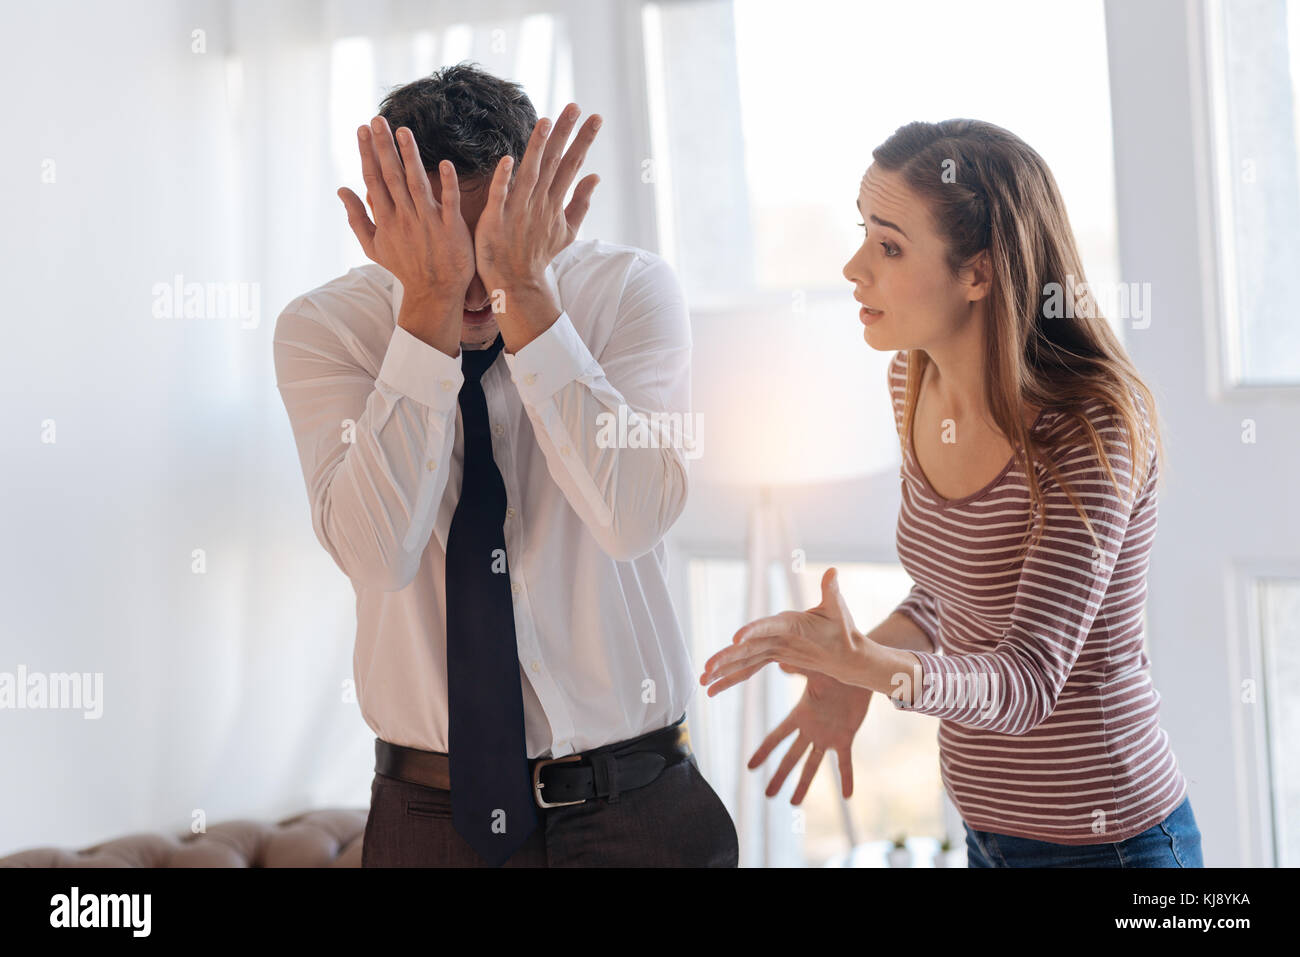 Angry woman blaming her tired irritated husband during their quarrel Stock Photo